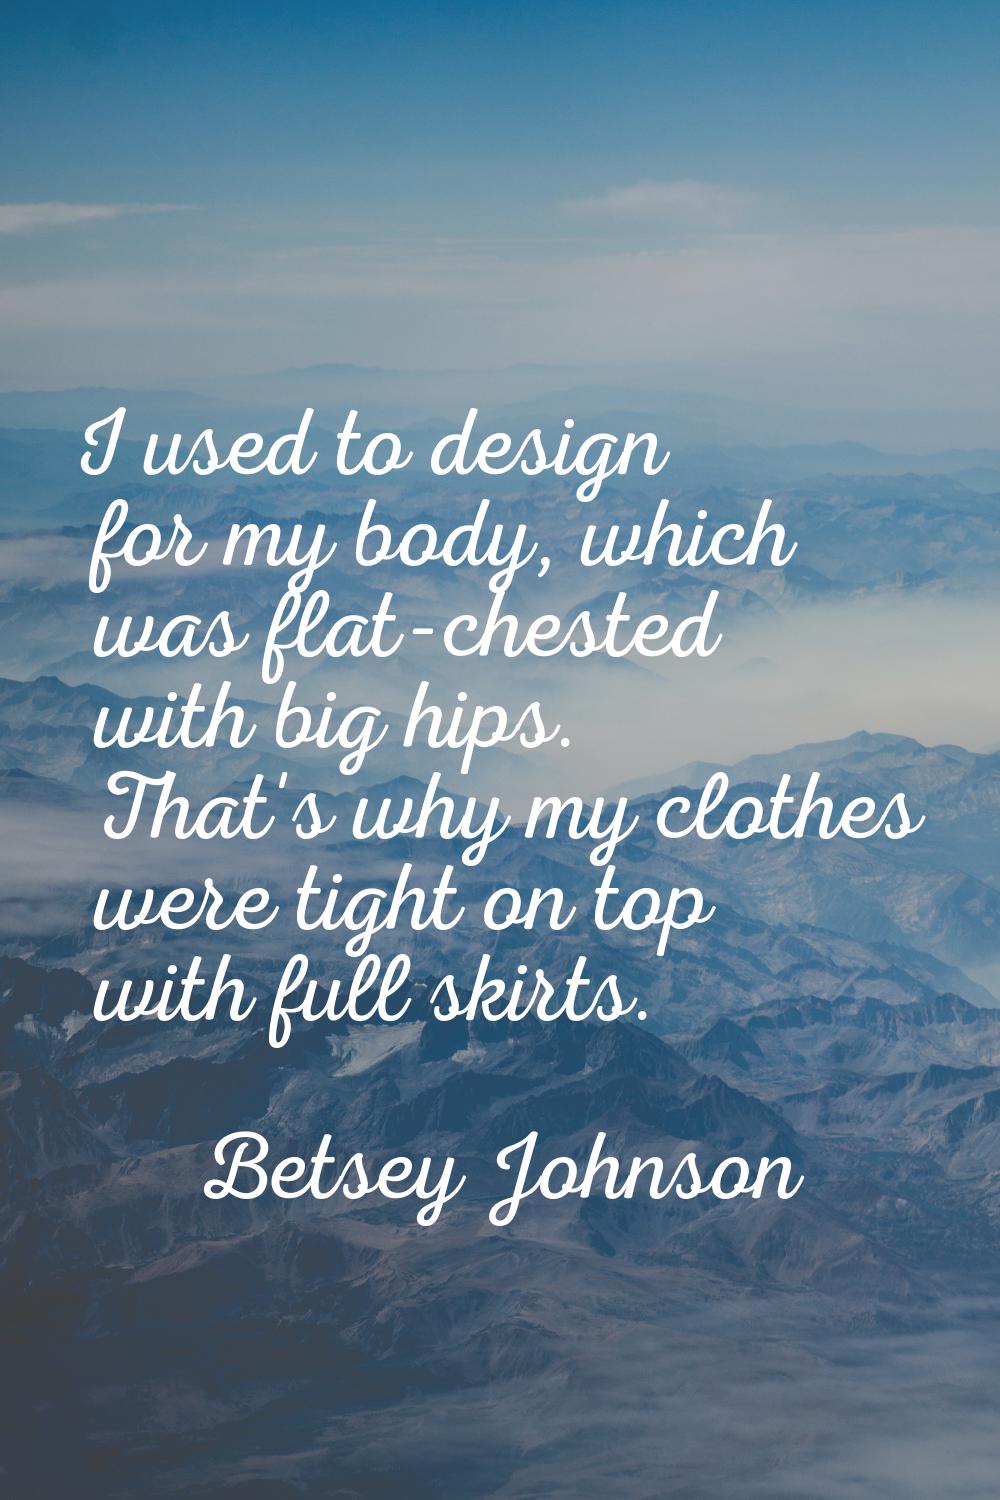 I used to design for my body, which was flat-chested with big hips. That's why my clothes were tigh